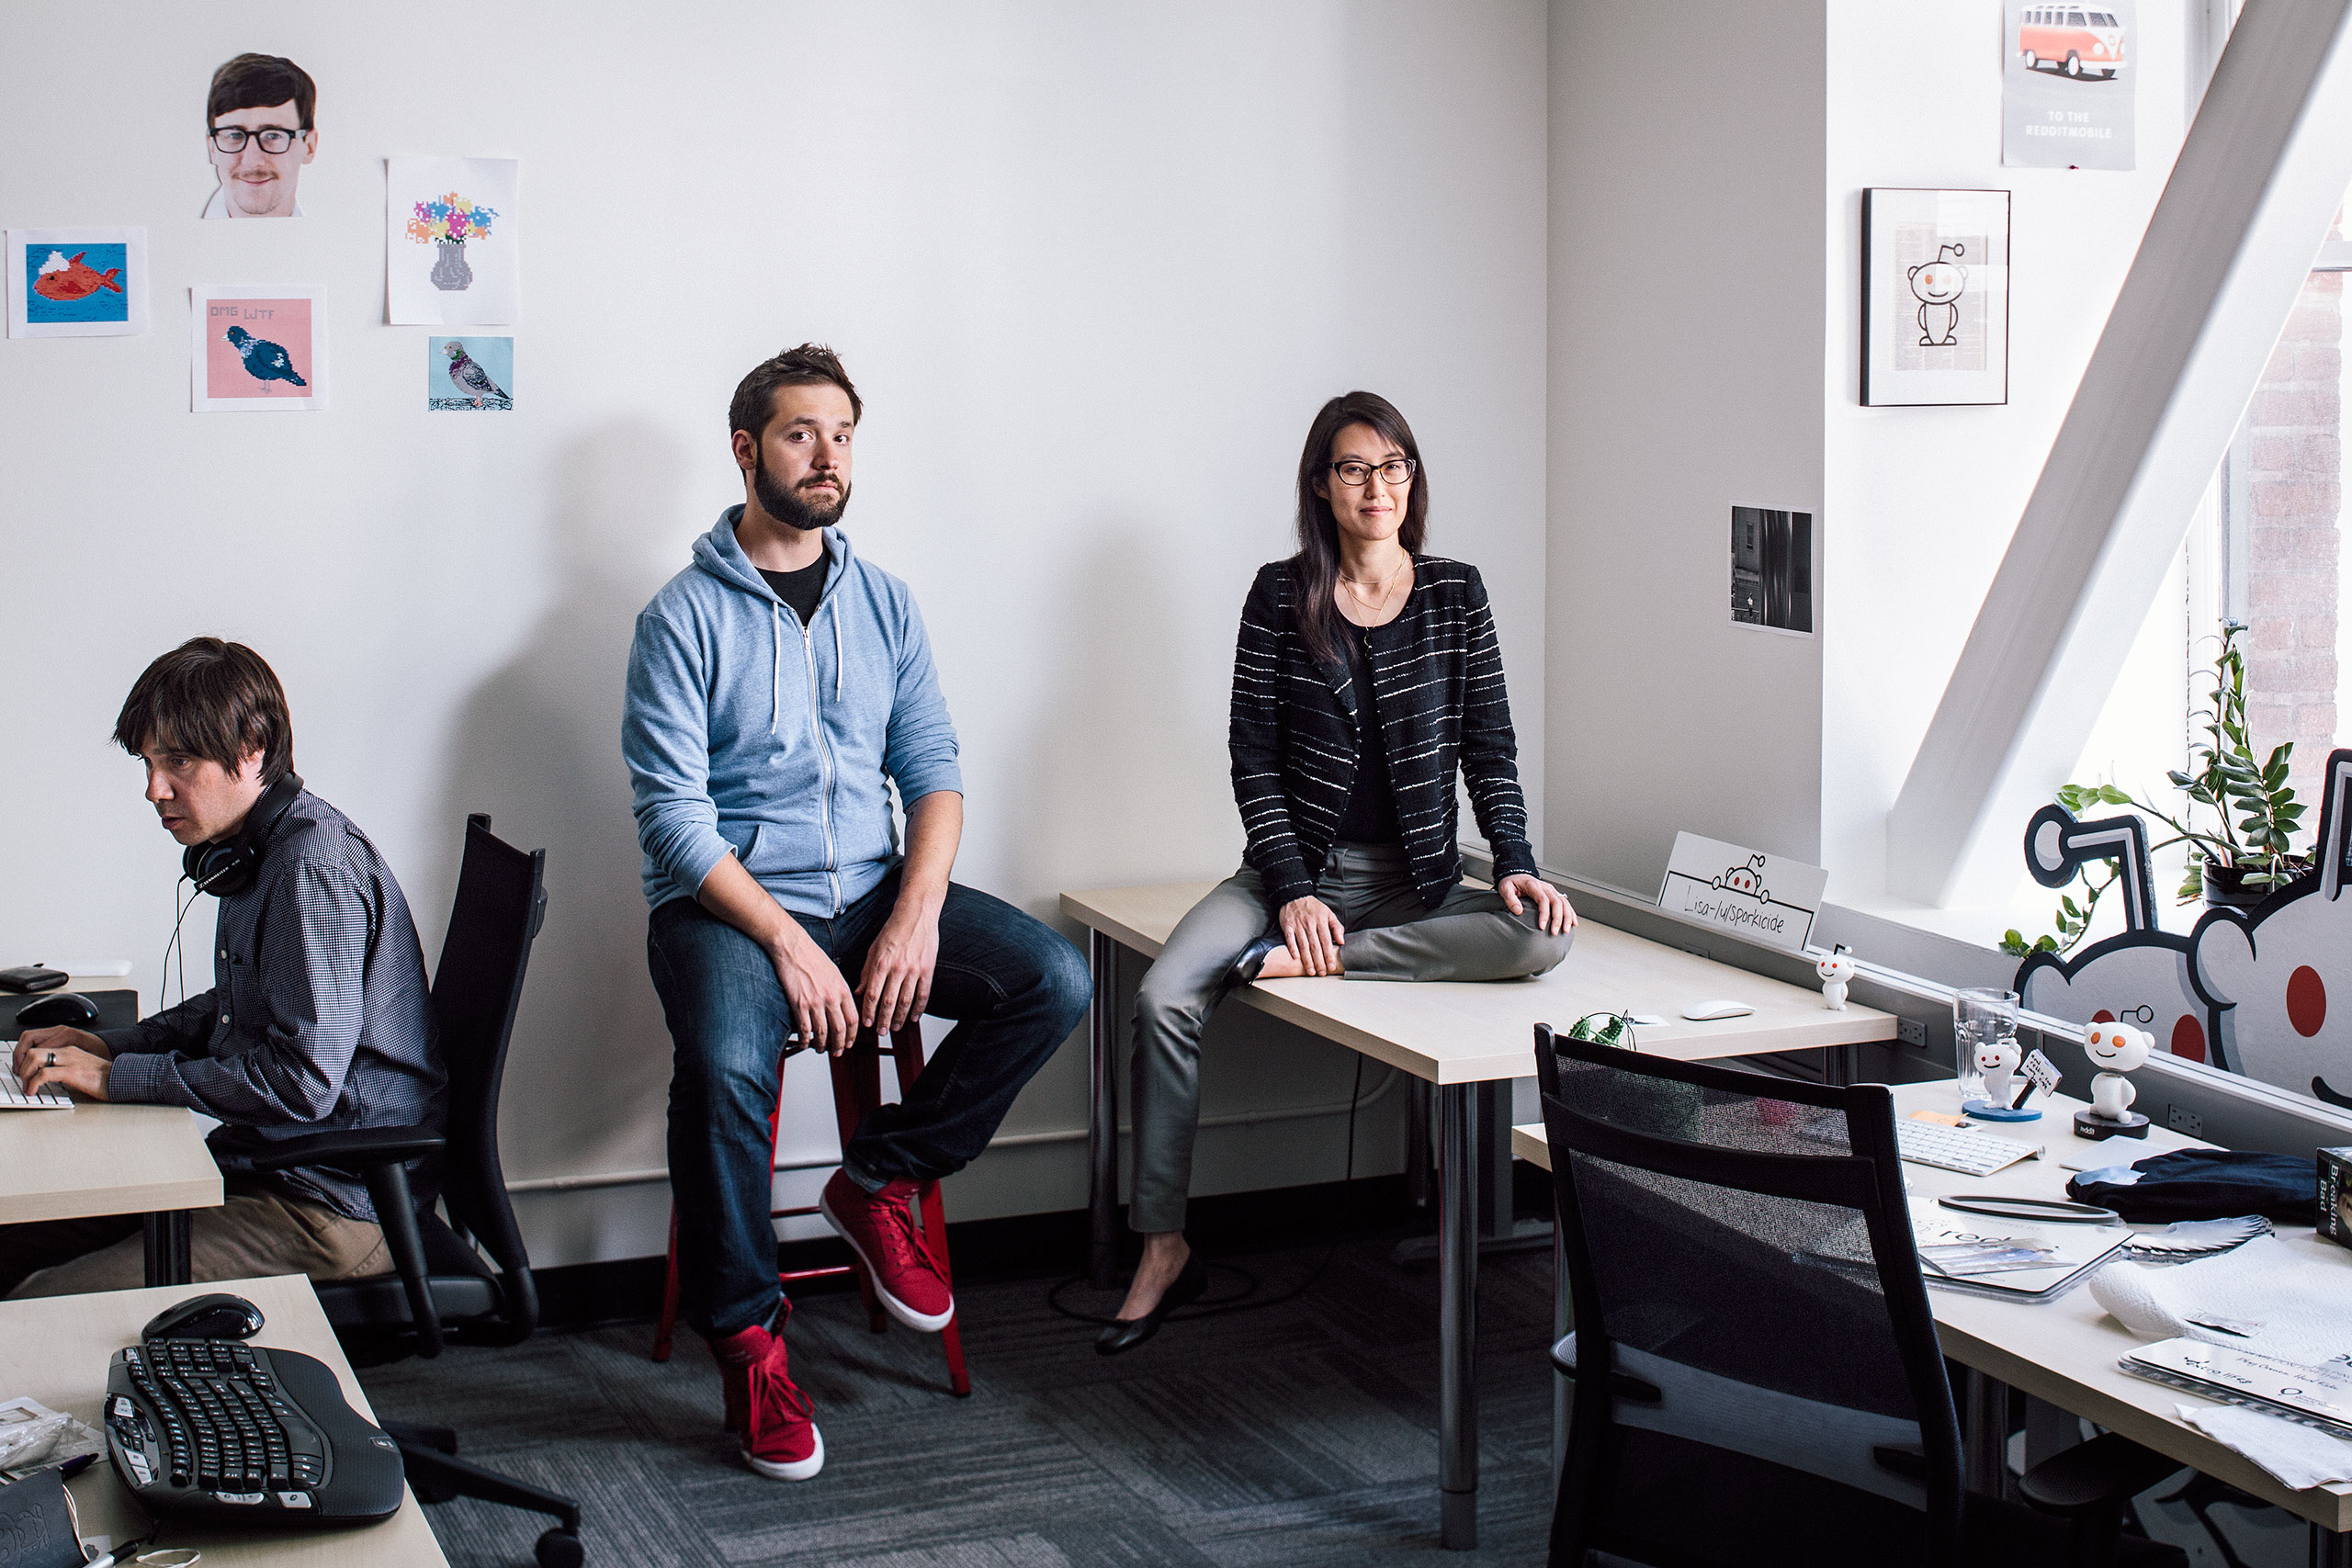 Alexis Ohanian, left, and Ellen Pao of Reddit photographed in their San Francisco office, Thursday, June 25, 2015.From  Reddit Reboots.  July 20, 2015 issue.